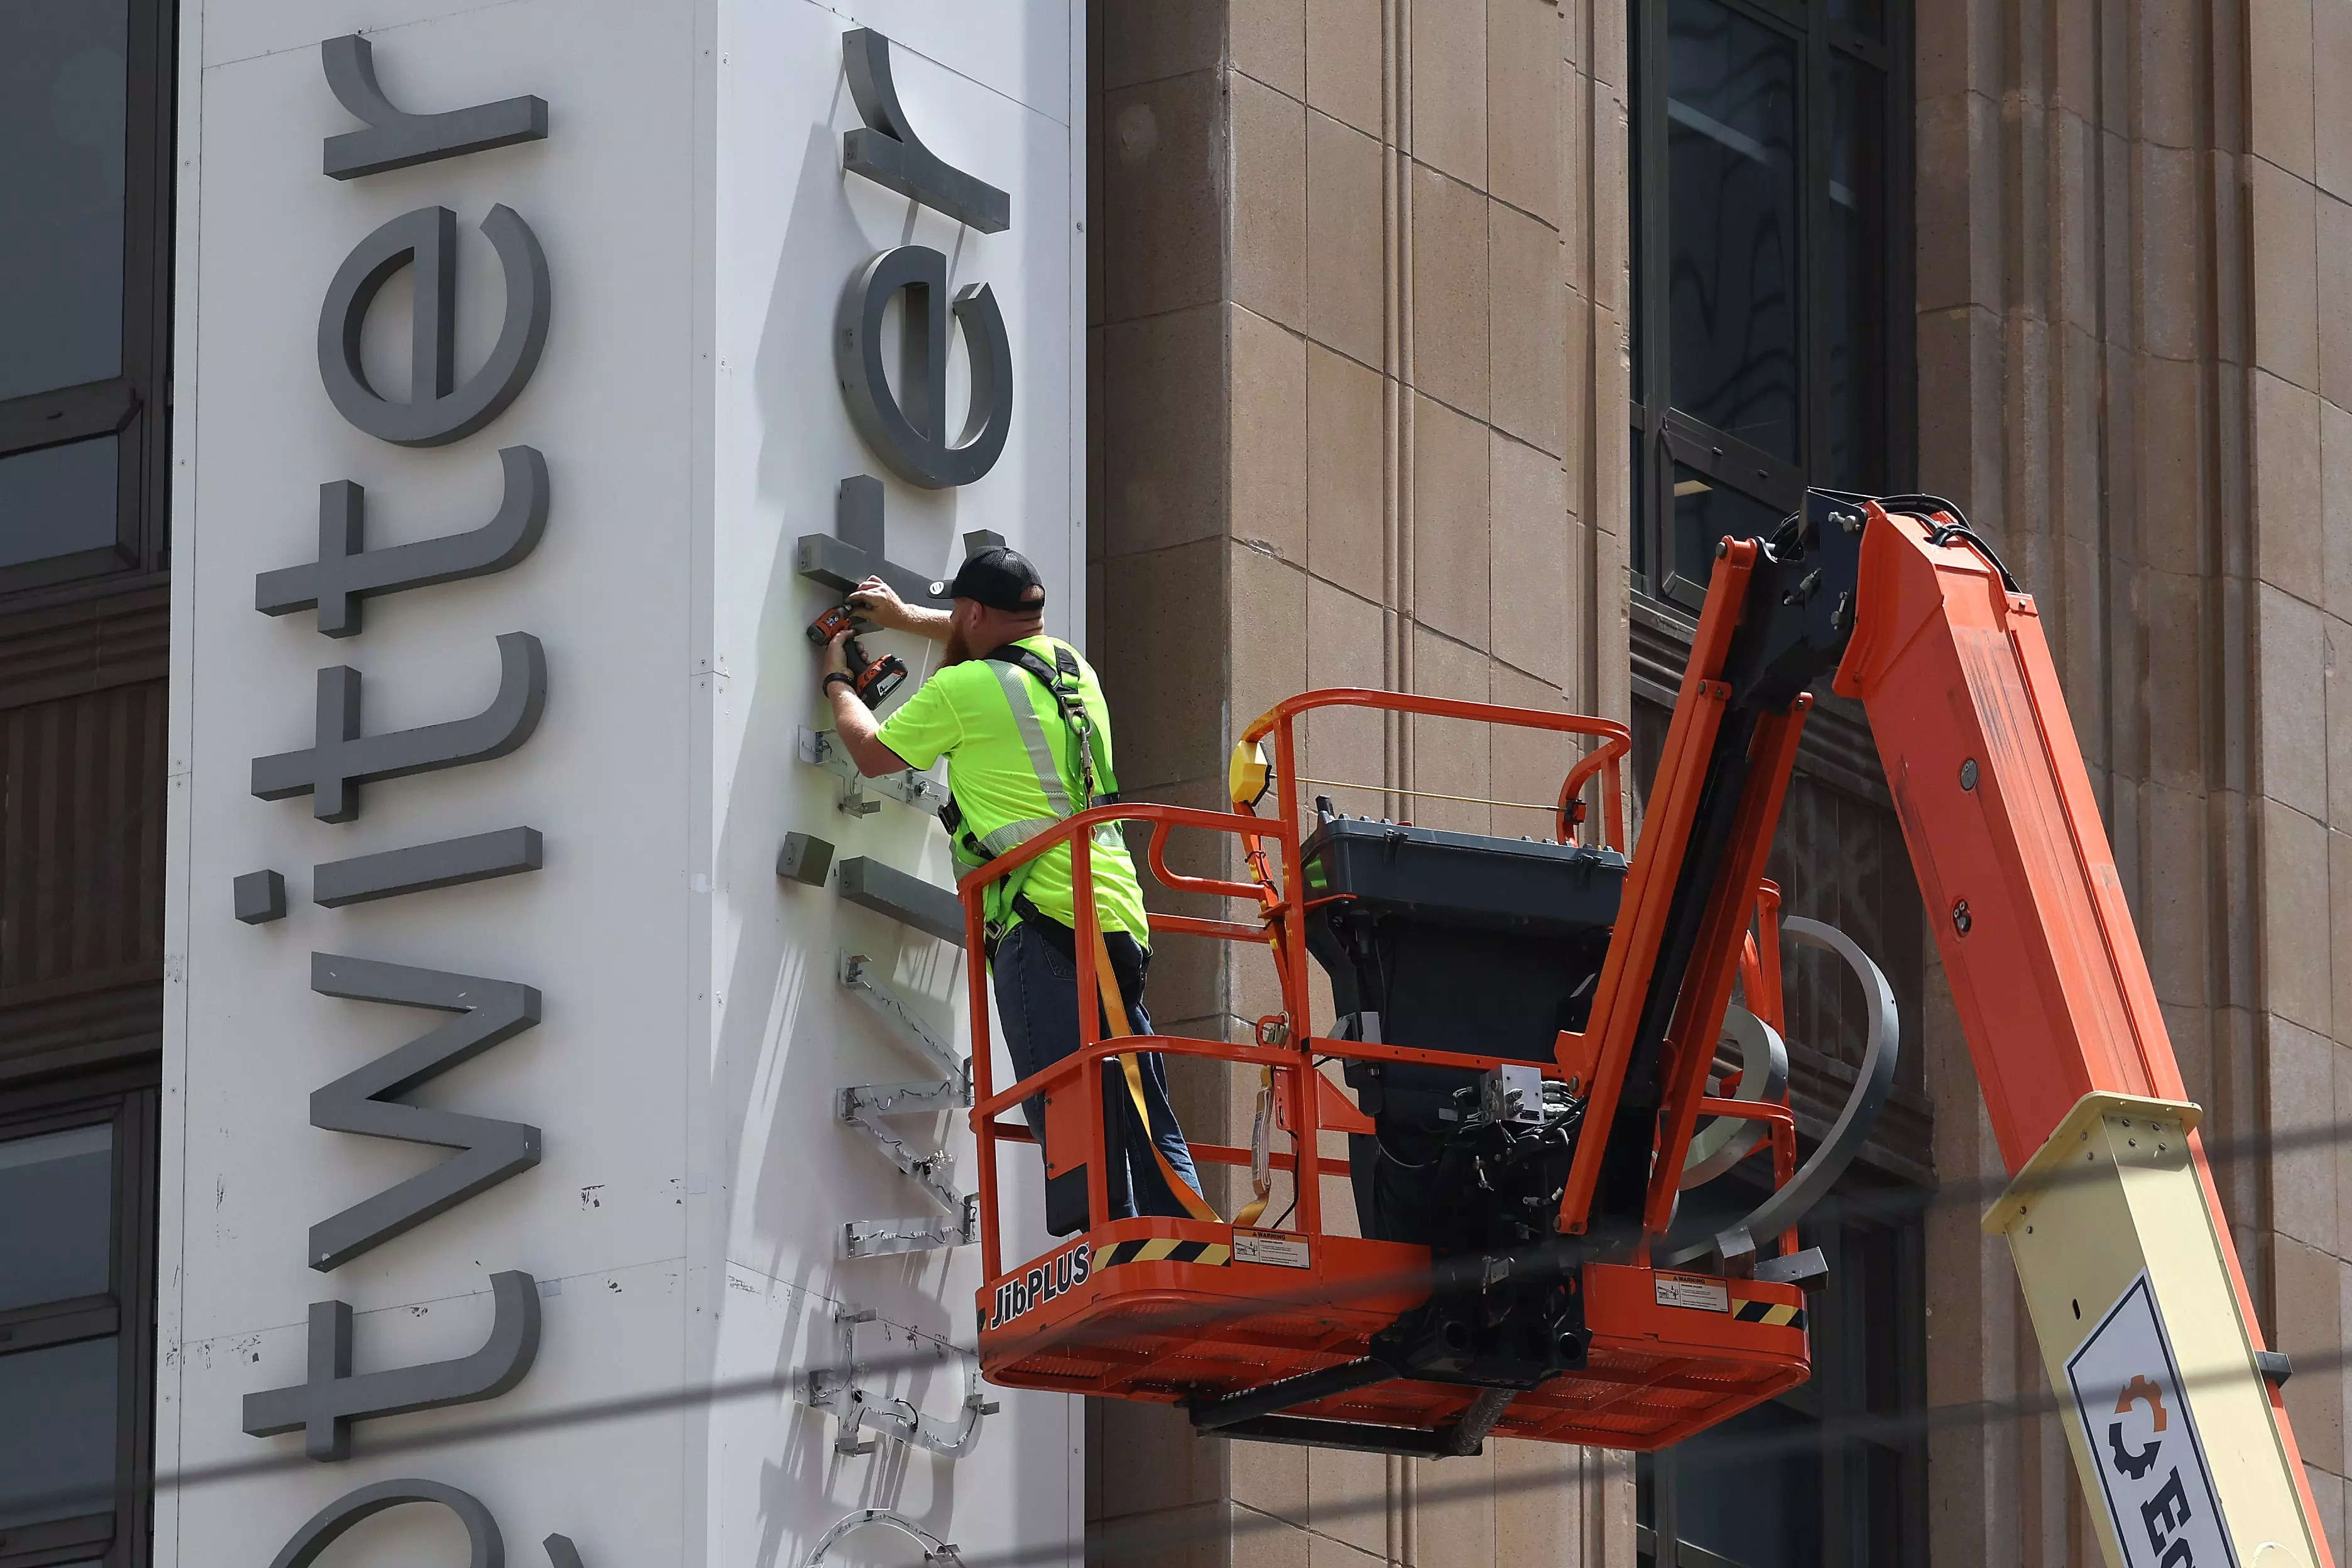 A worker in a high-visibility jacket using a cherry picker to remove letters from a large sign that reads "Twitter"